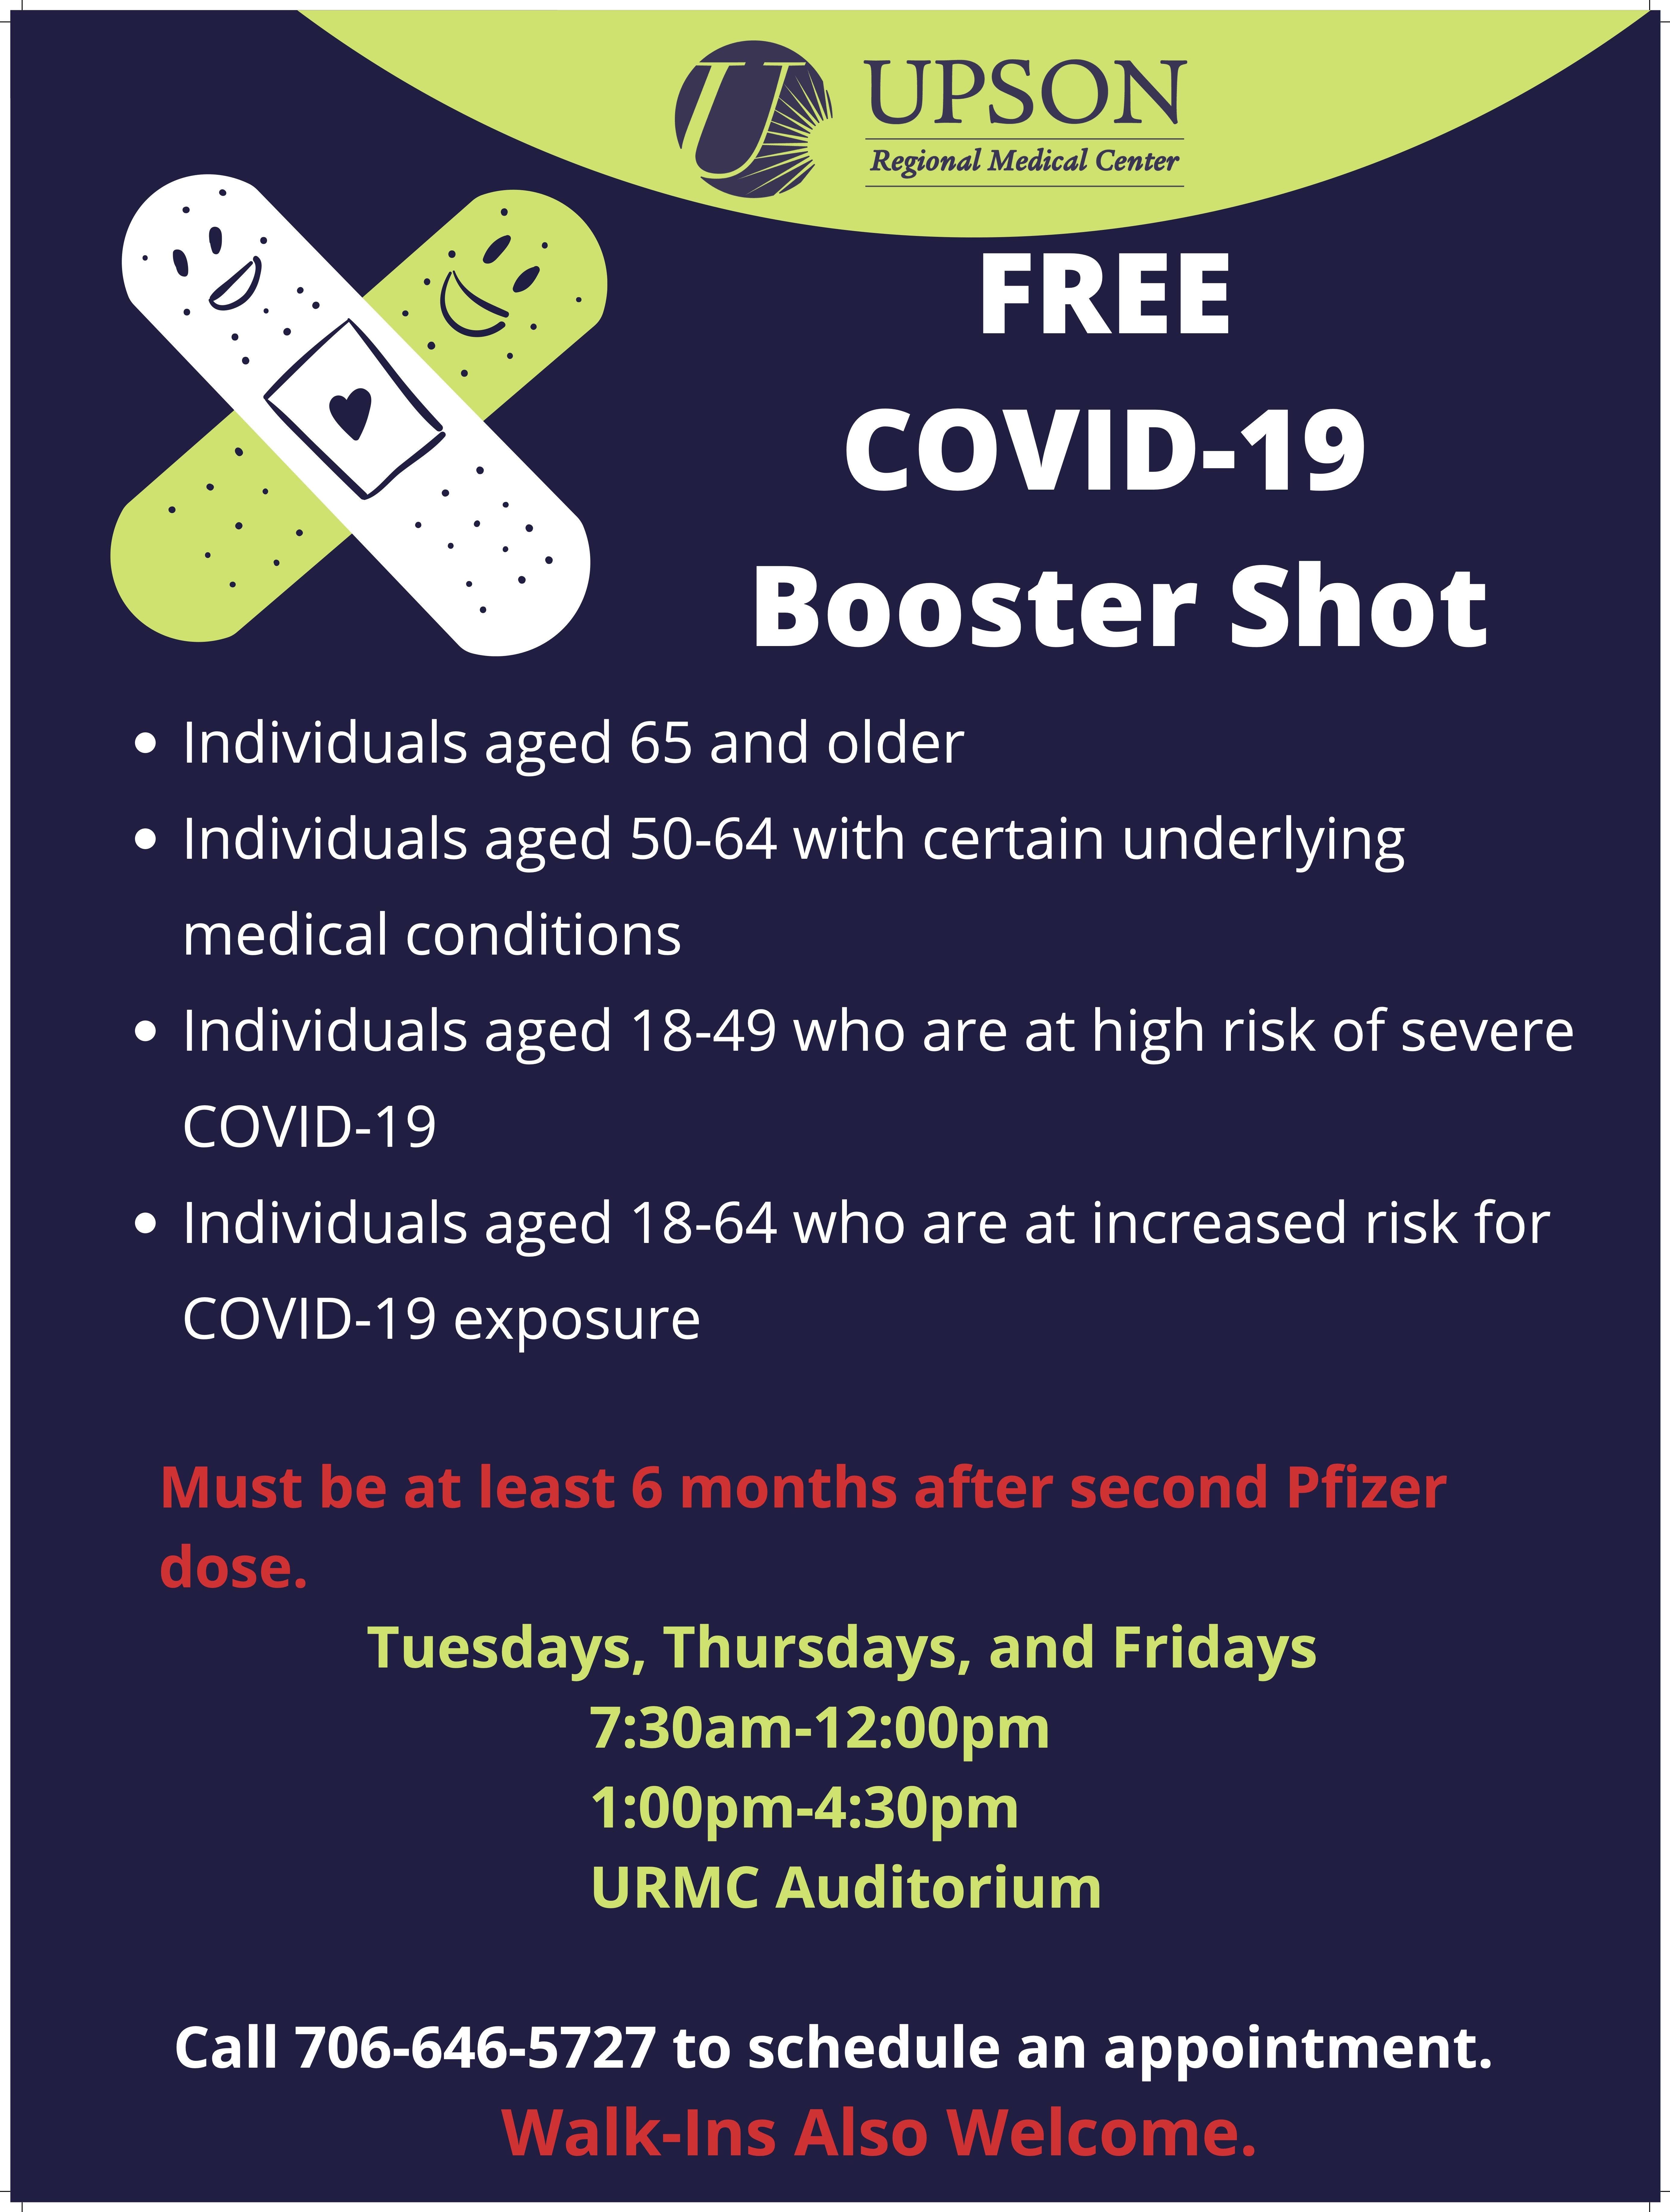 Photo for URMC now accepting Walk-Ins for COVID-19 Booster Shots